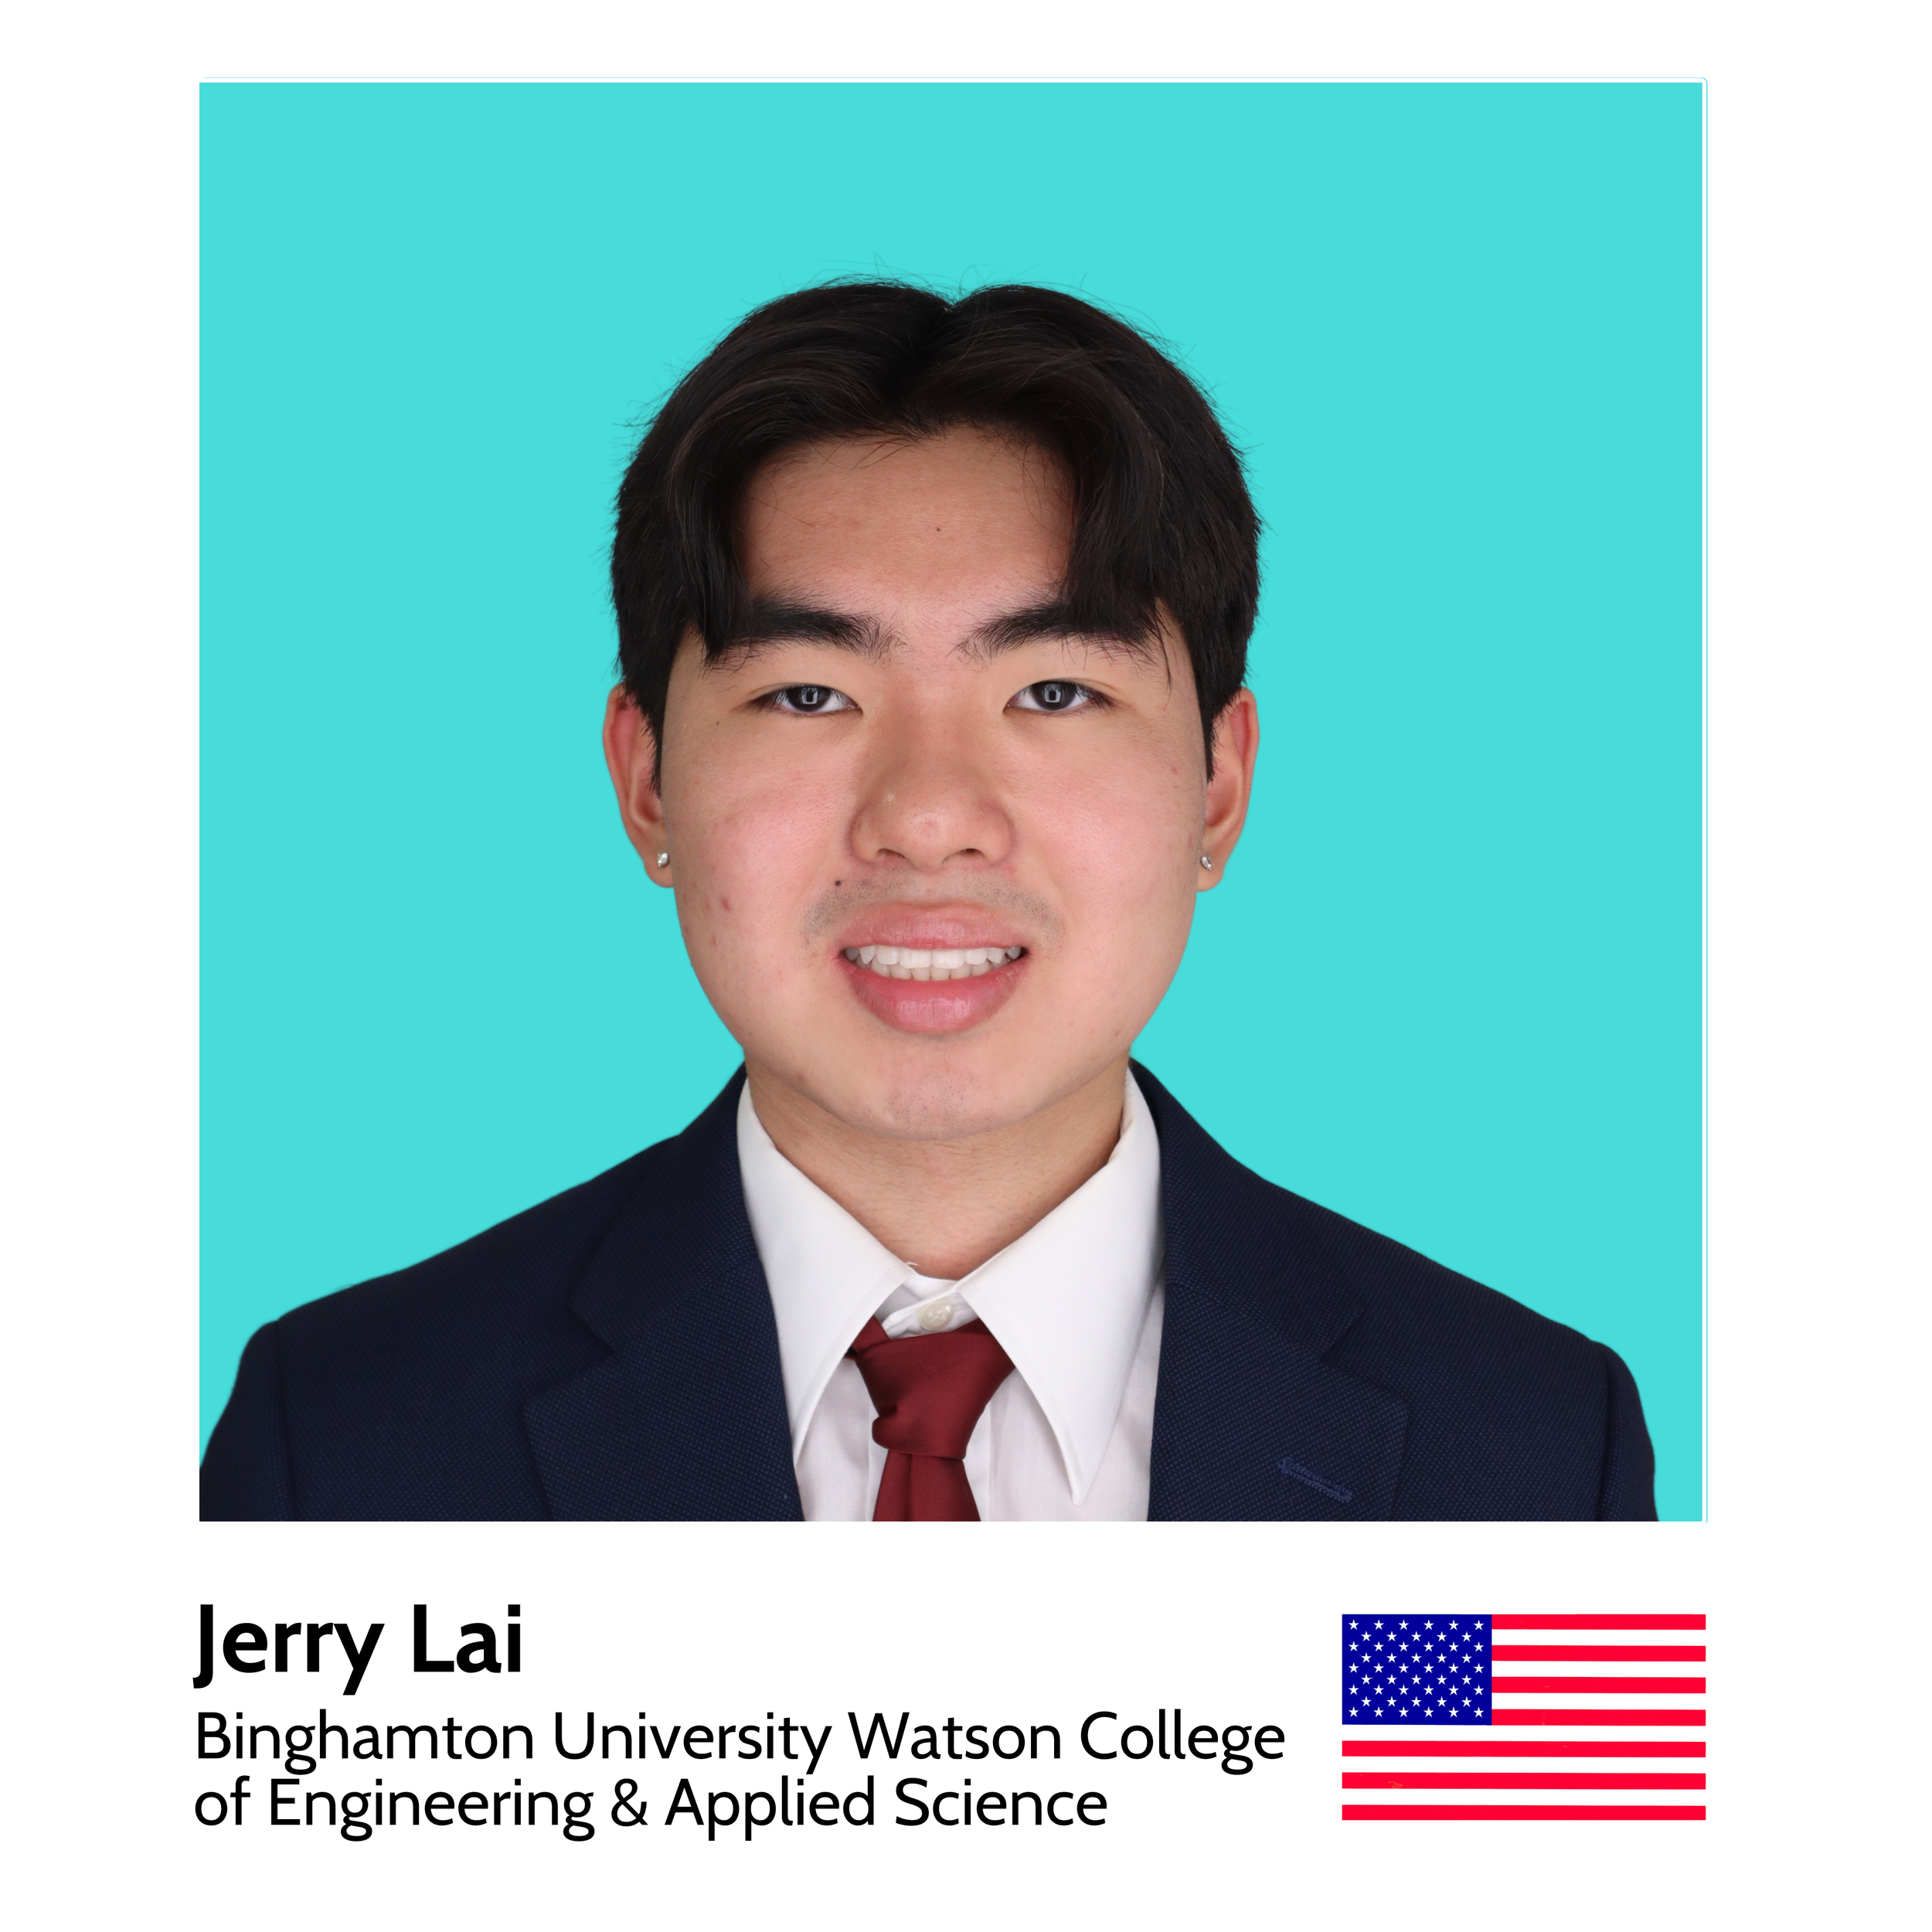 Your_Big_Year_ibm_zsystems_ambassador_jerry_lai_binghamton_university_watso_college_of_engineering_and_applied_scienc.png